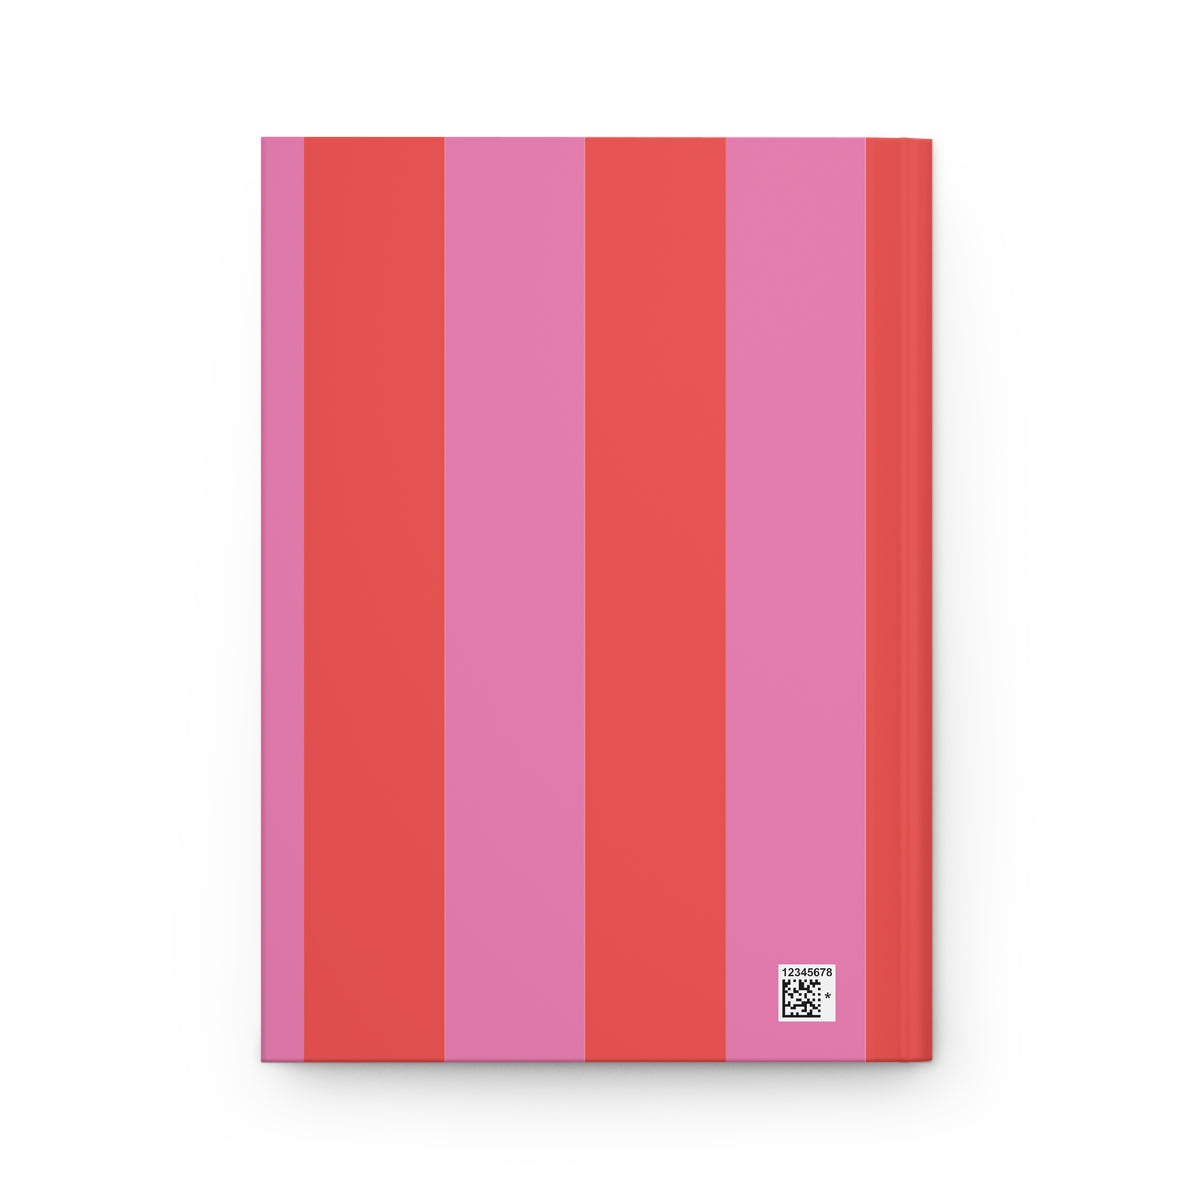 Stripe Monogram Custom Journal Notebook for teacher gift, Mother's Day, Bridemaid party gifts | Pink + Red